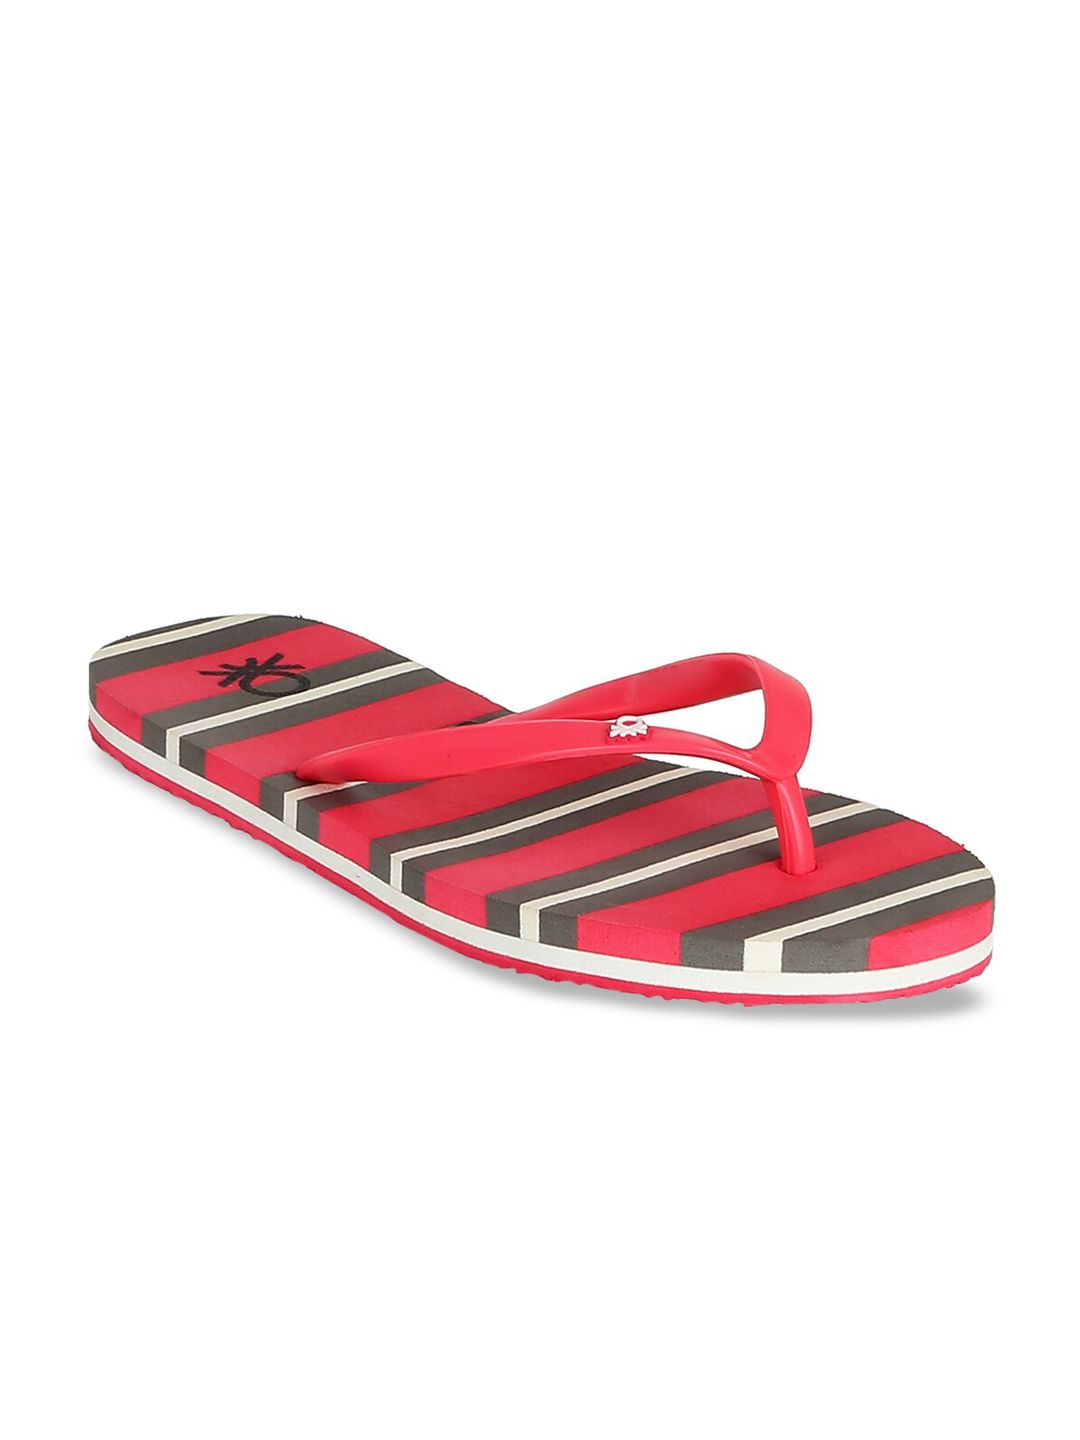 United Colors of Benetton Women Red & Grey Striped Thong Flip-Flops Price in India